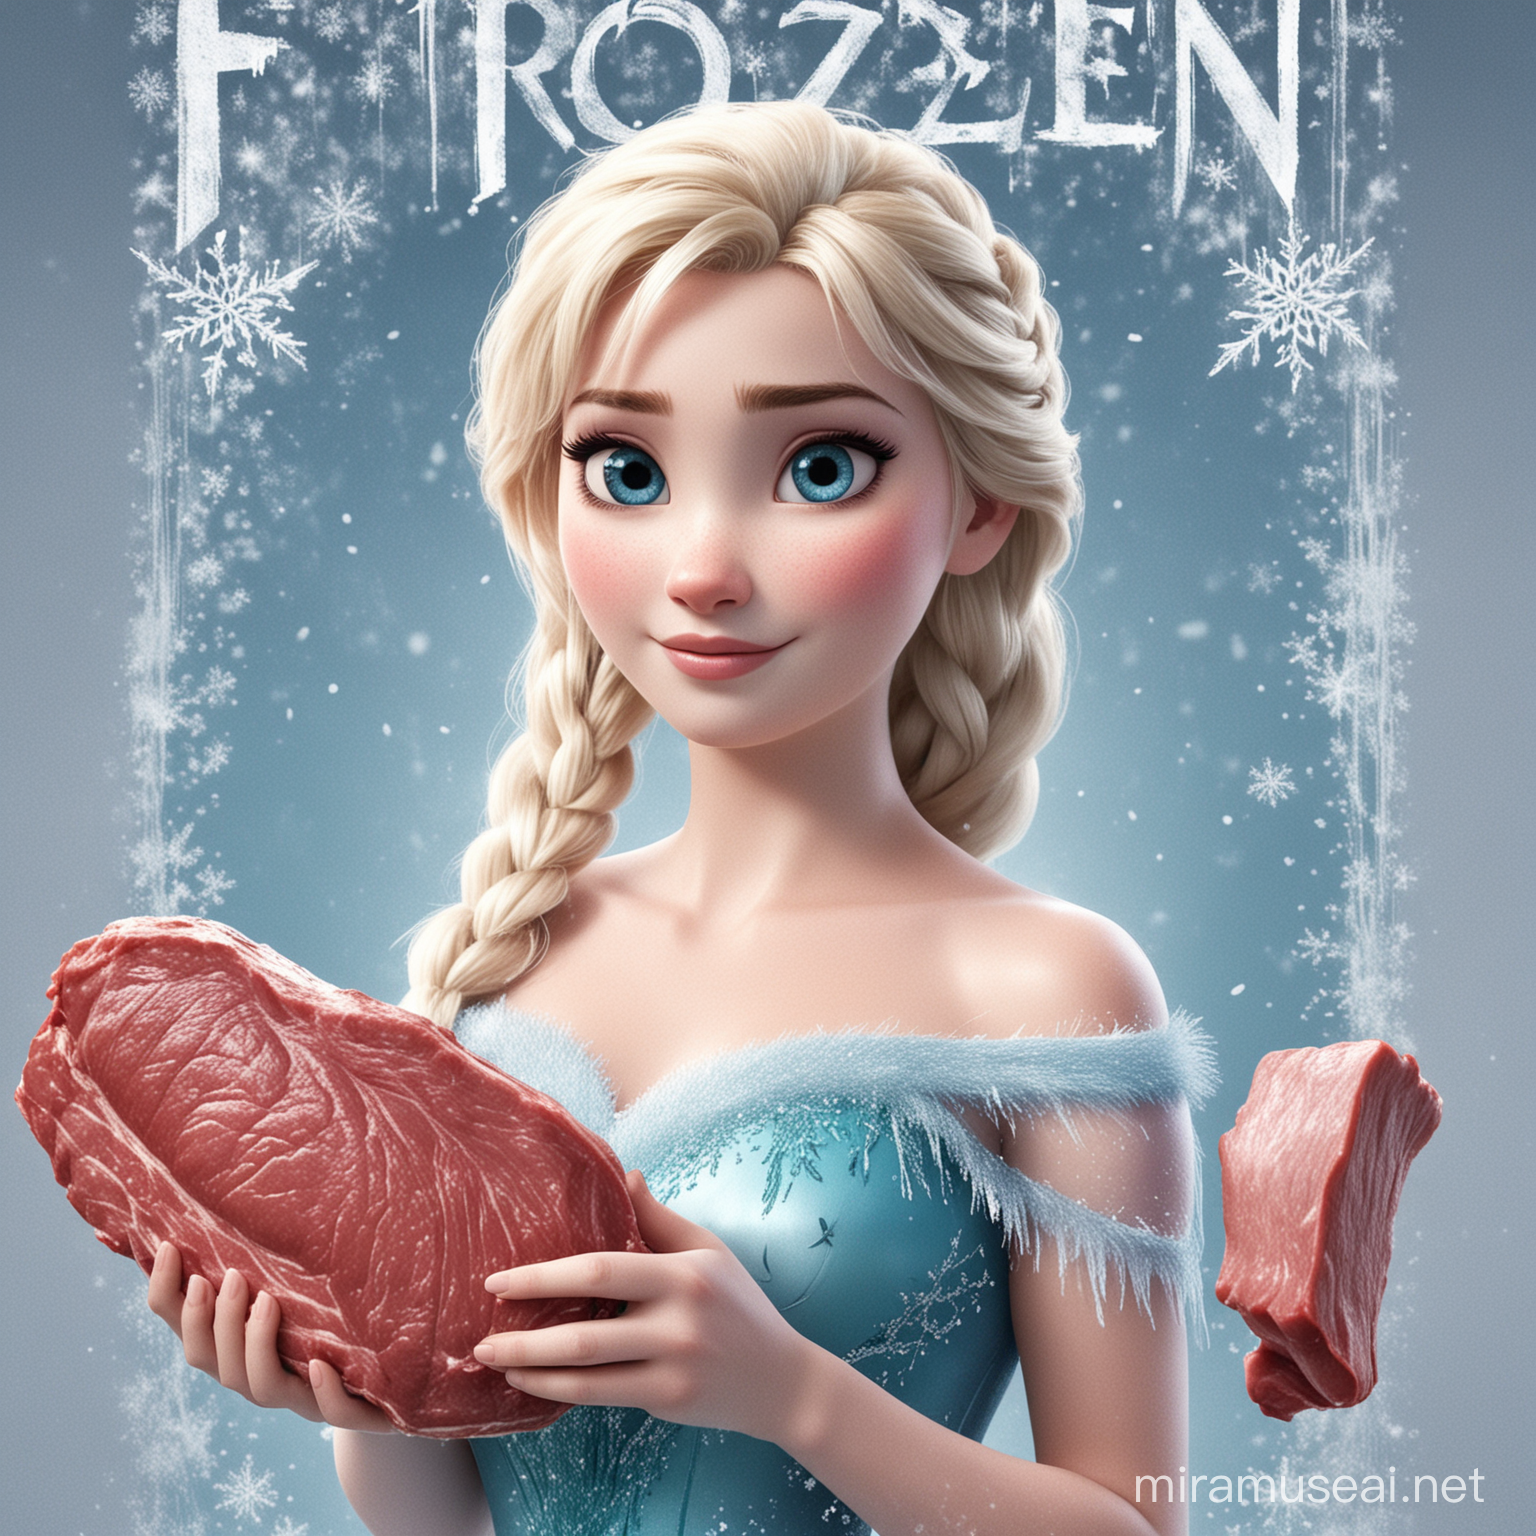 Remake the poster of frozen. Make elsa holding frozen meat. After that name it as a frozen meat